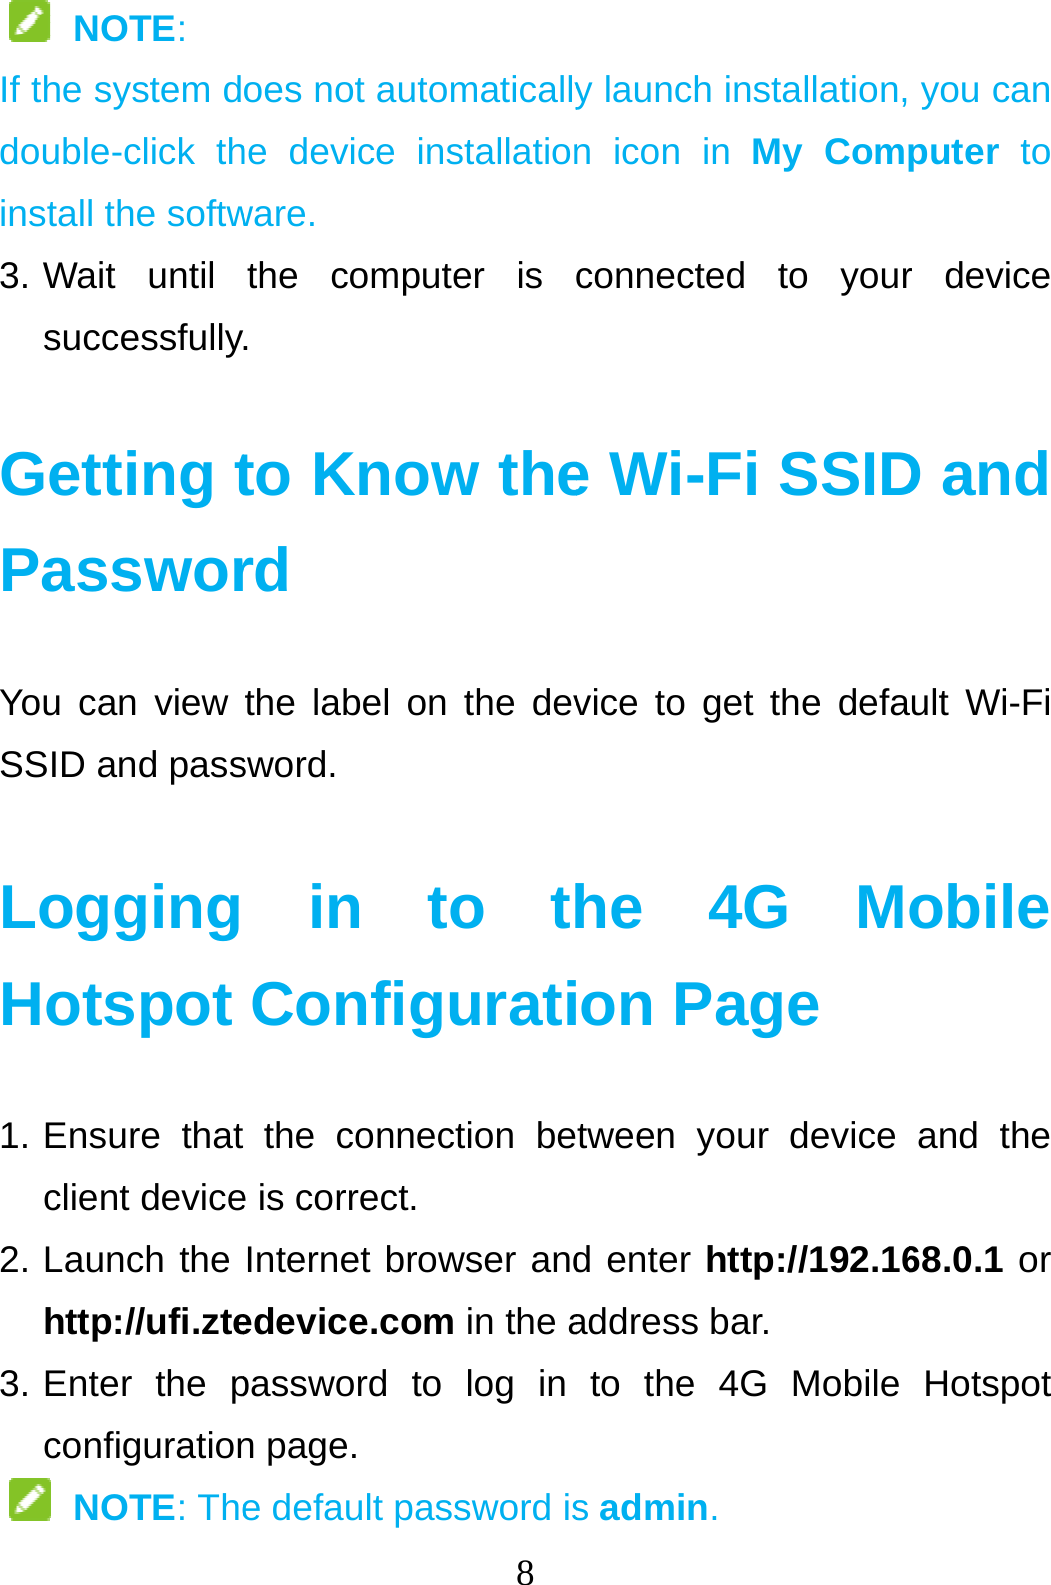   NOTE:   If the system ddouble-click thinstall the softw3. Wait  until successfully Getting tPassworYou can view SSID and pass Logging Hotspot 1. Ensure  that client device2. Launch the http://ufi.zte3. Enter  the pconfiguration NOTE: The8 oes not automaticallyhe device installationware. the computer is . to Know therd the label on the devsword. in to thConfiguratithe connection bee is correct. Internet browser andedevice.com in the apassword to log in n page. e default password isy launch installation,n icon in My Comconnected to youre Wi-Fi SSIDvice to get the defahe 4G Mon Page tween your device d enter http://192.16address bar. to the 4G Mobile s admin.  you can puter to r device D and ult Wi-Fi obile and the 68.0.1 or Hotspot 